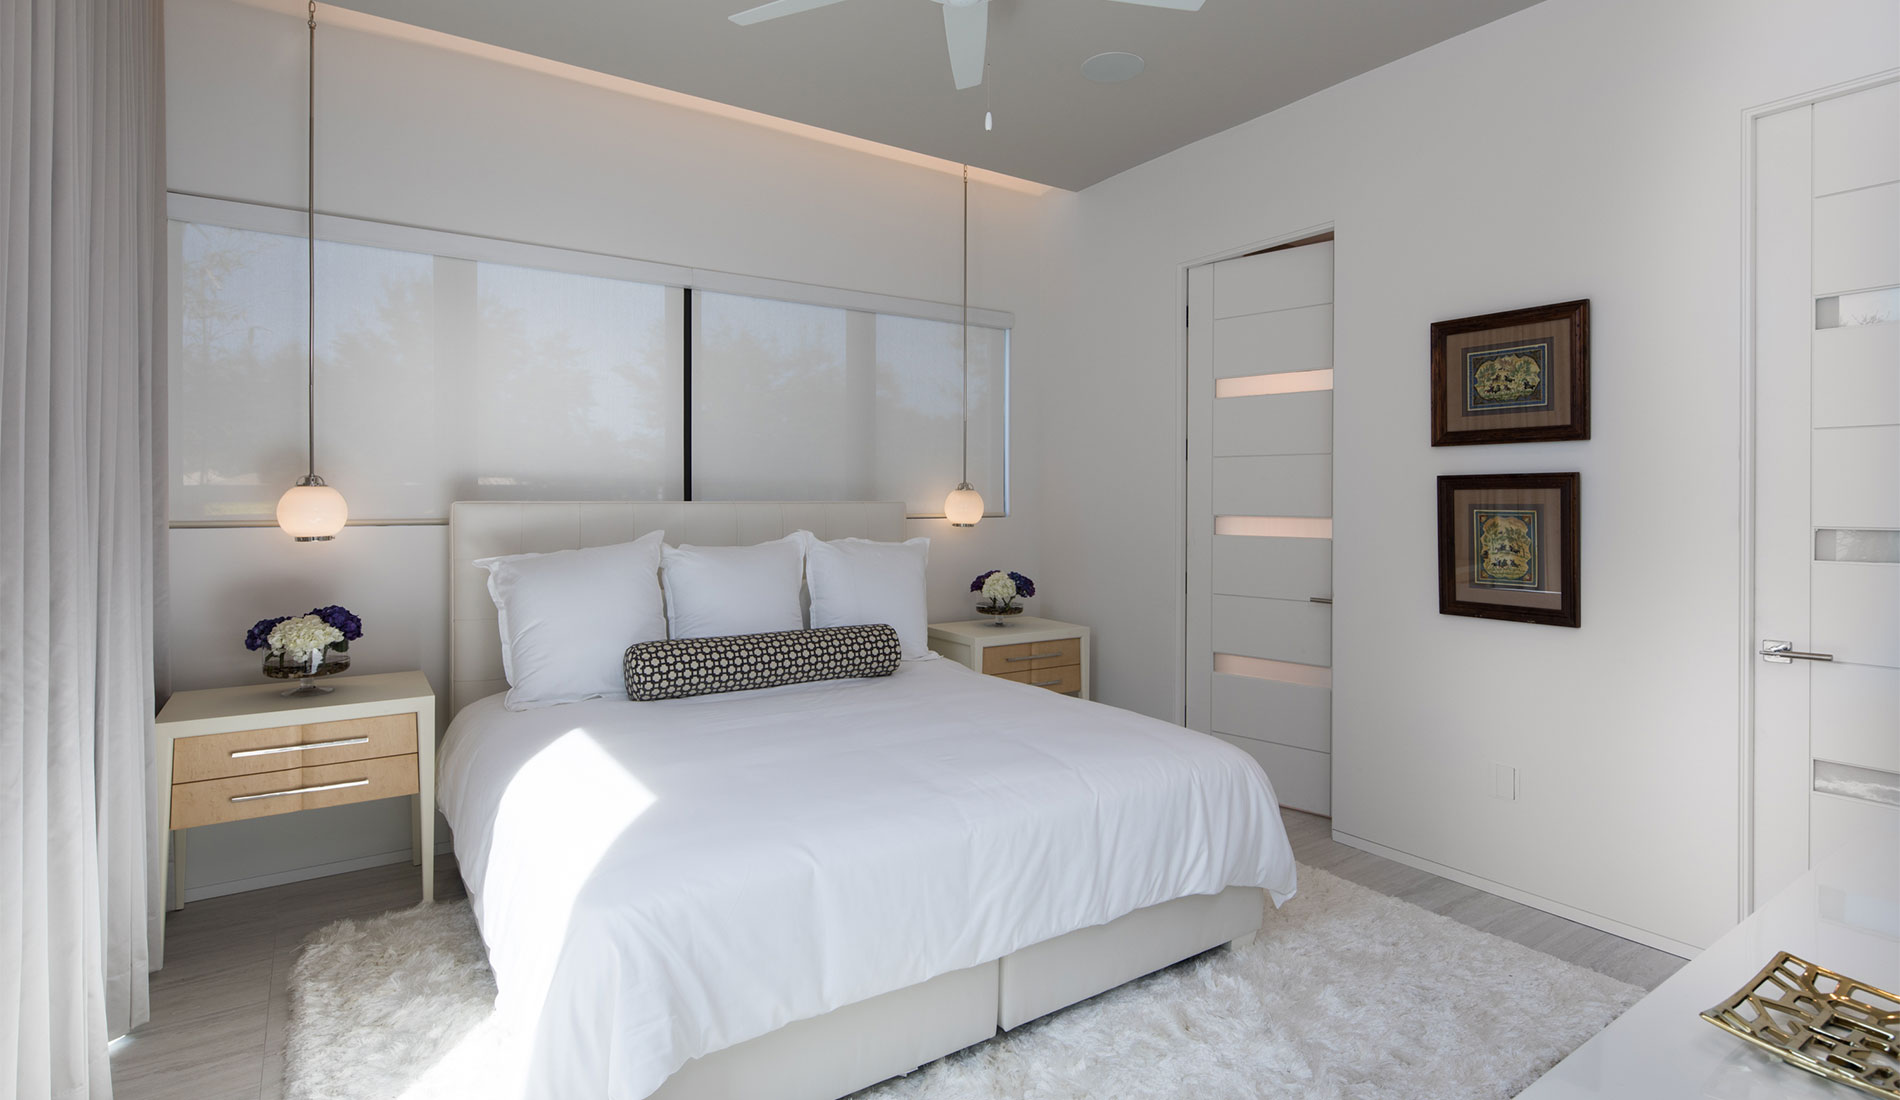 TM9320 doors with White Lami glass add a modern finish to this guest room 